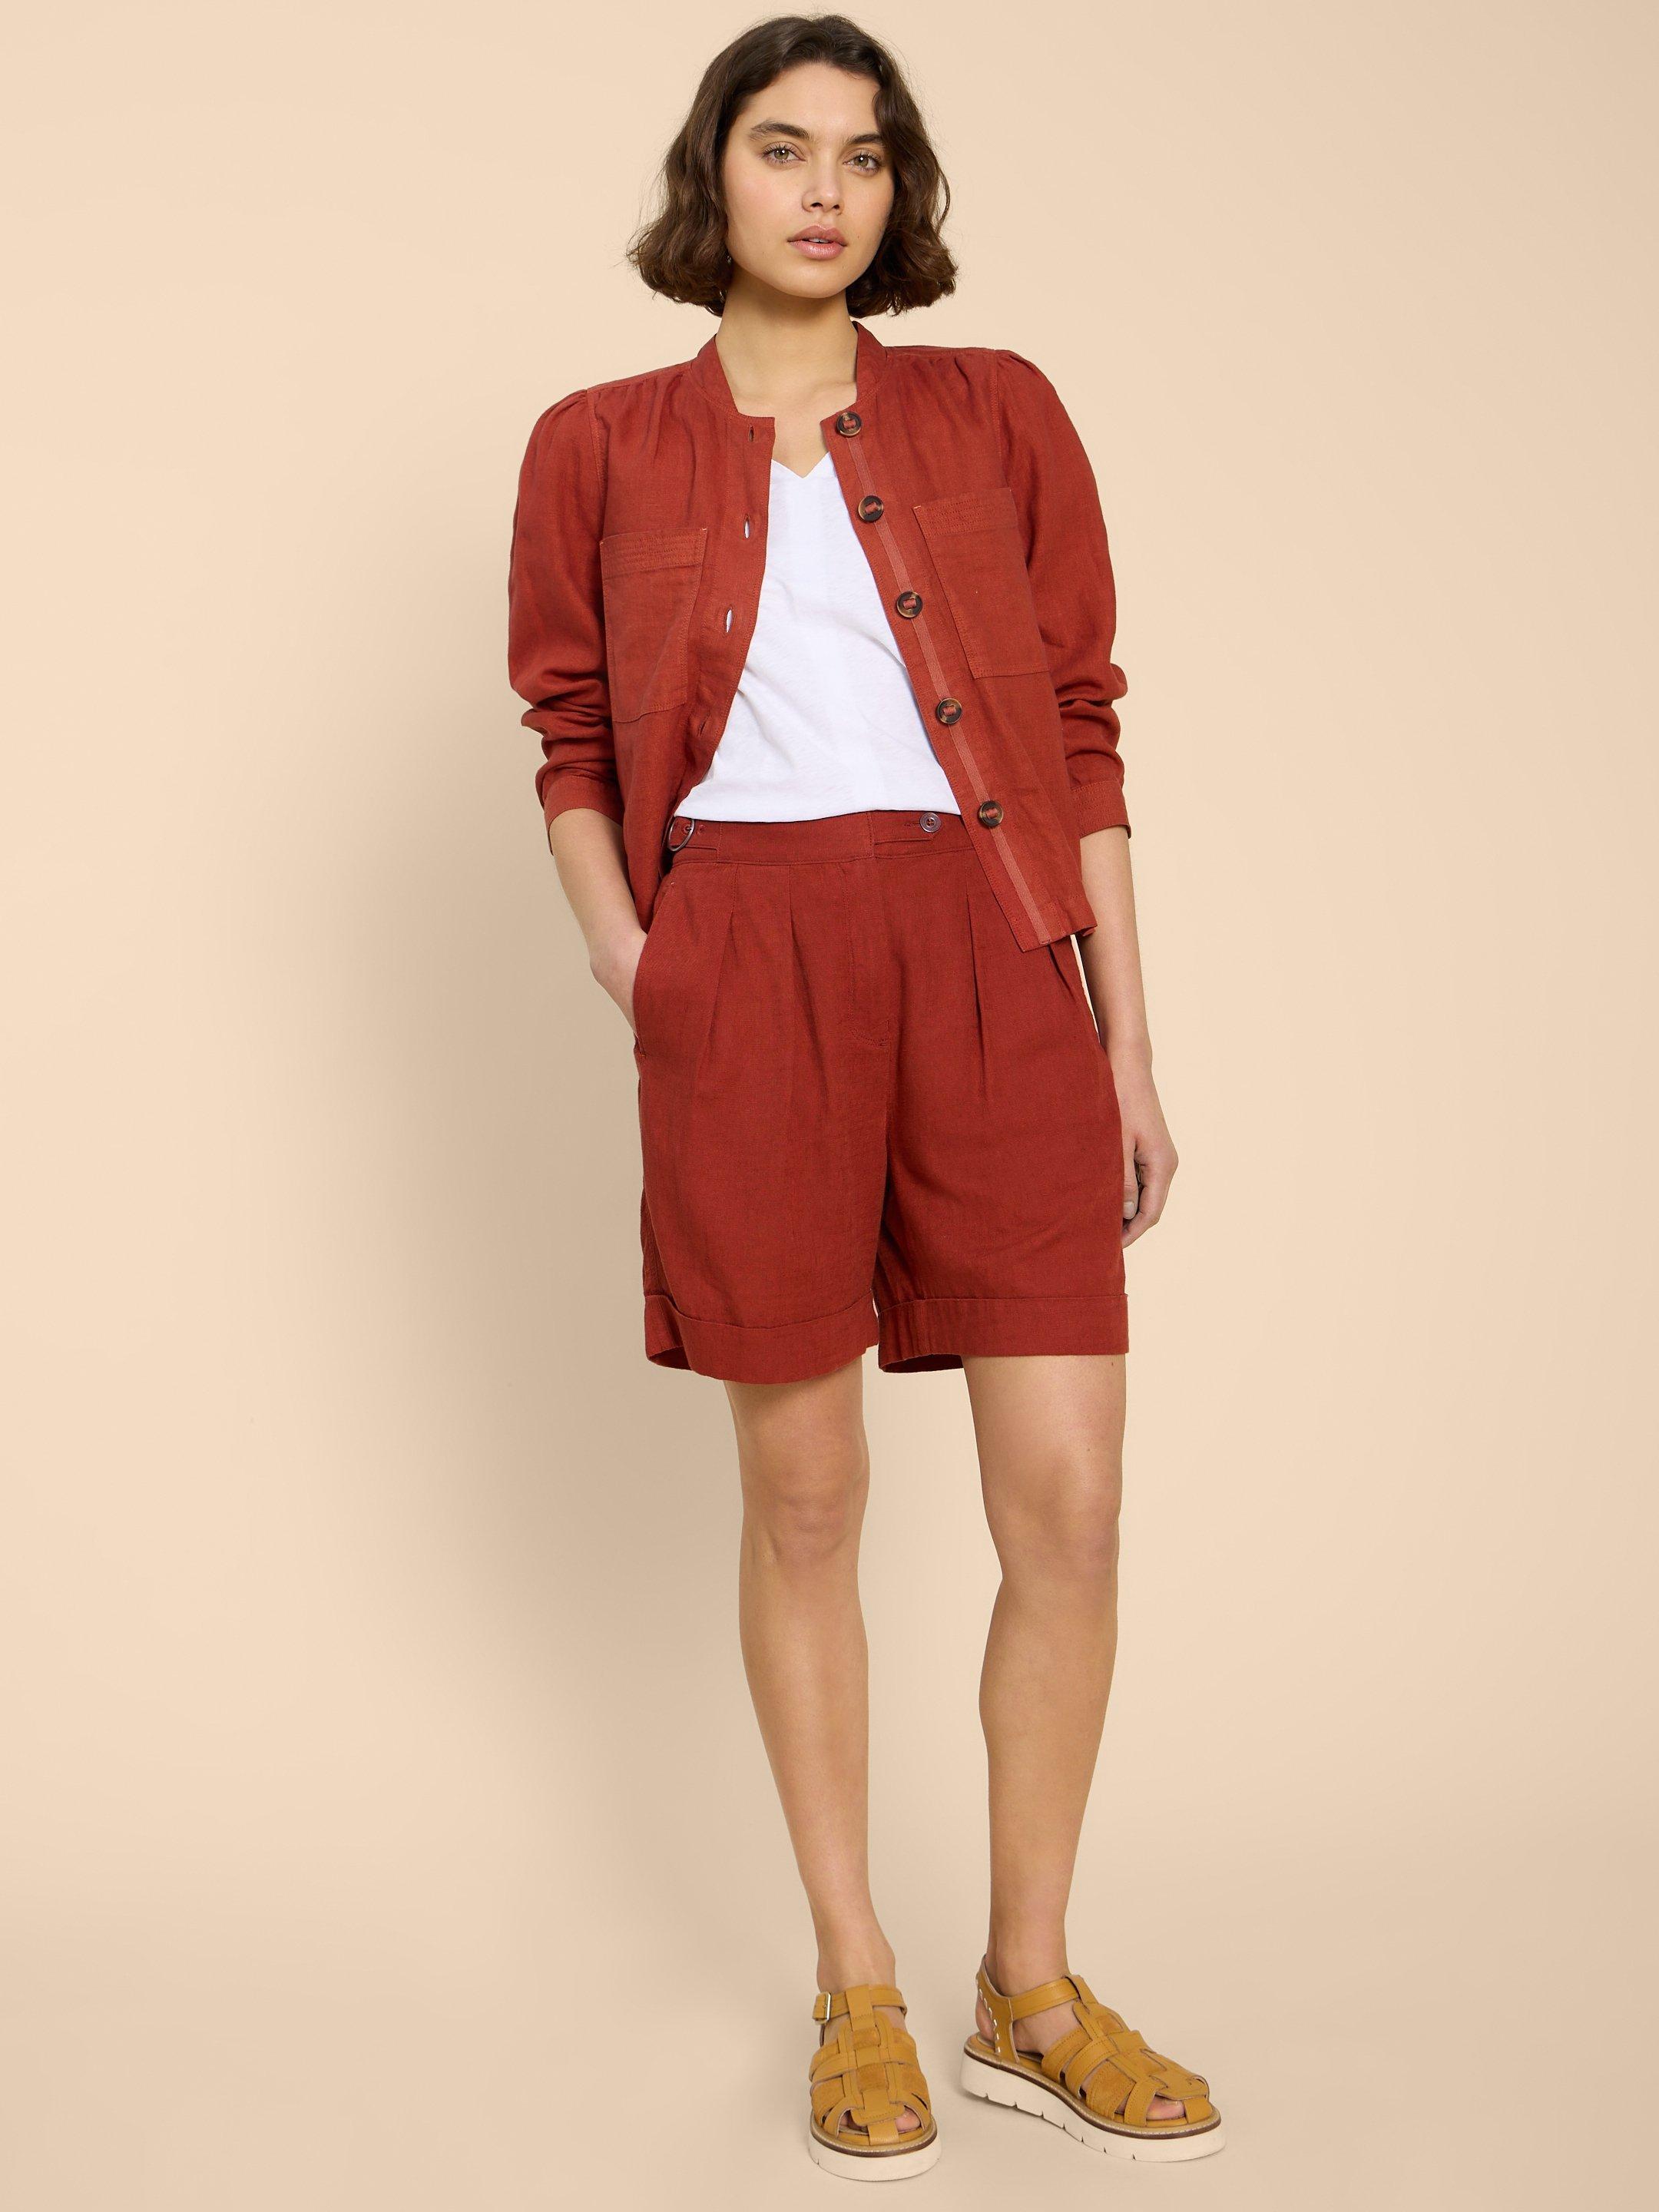 Una Shorts in DK RED - MODEL FRONT